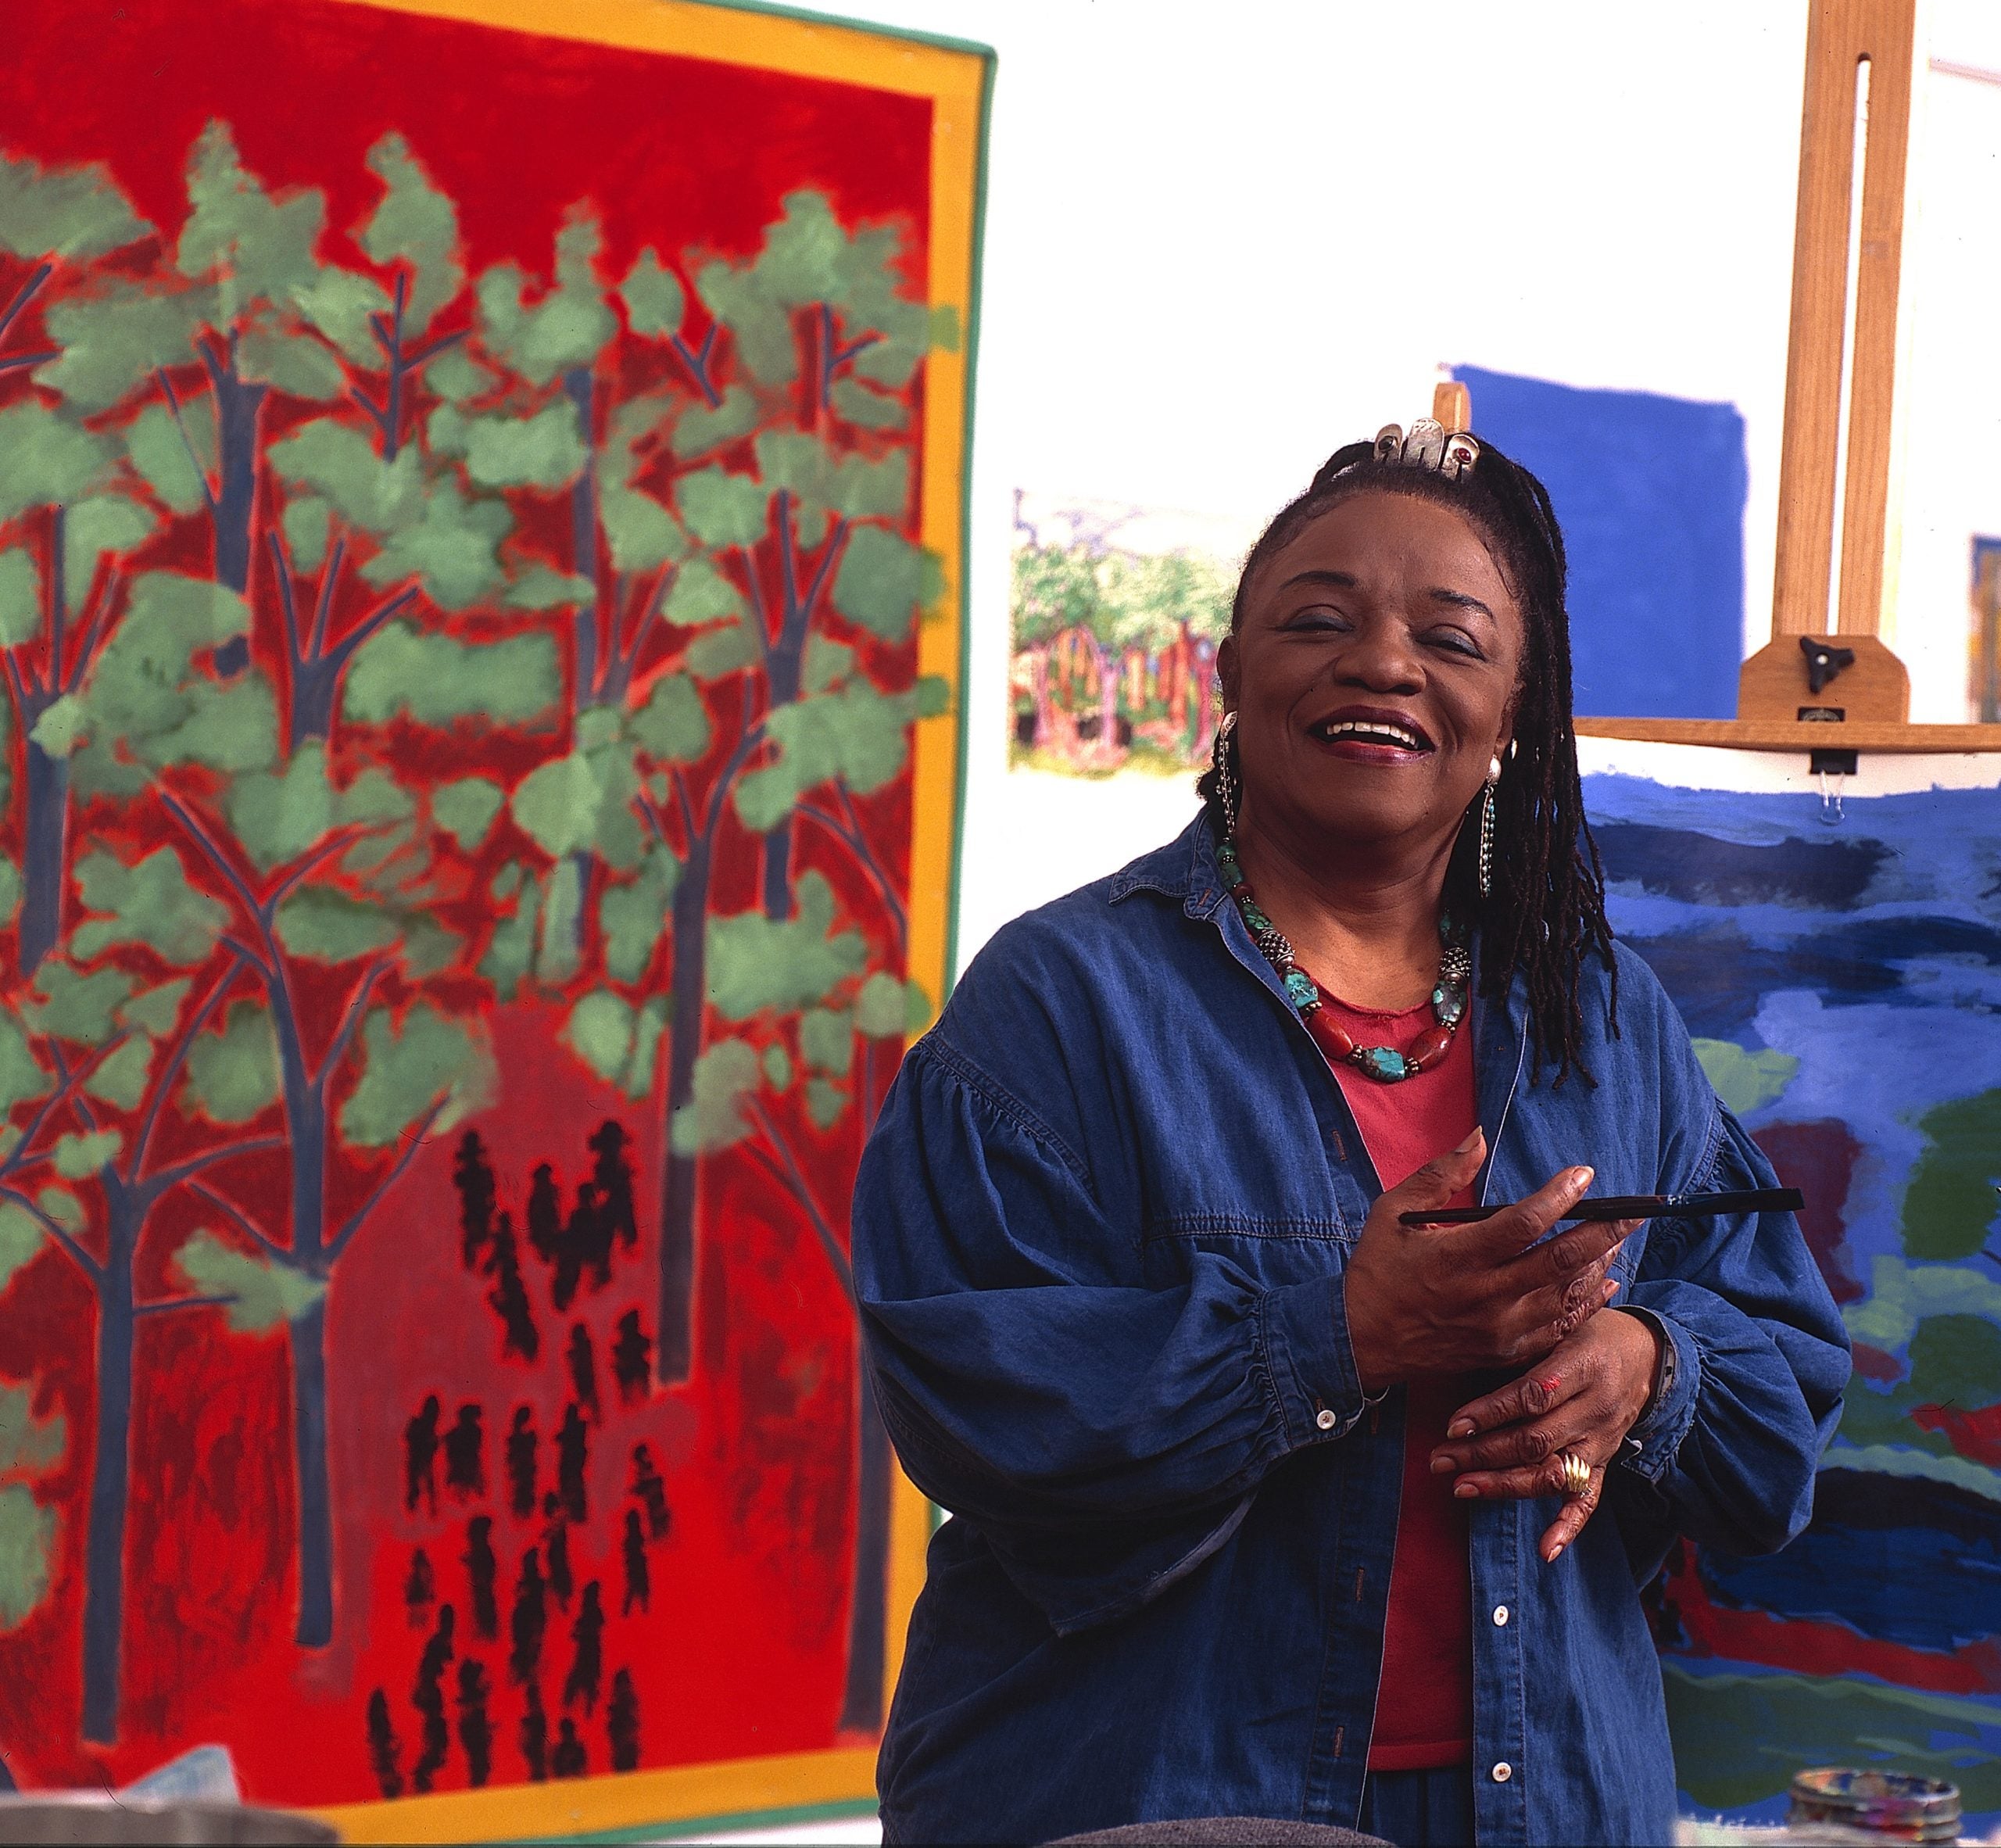 Revolutionary visual artist Faith Ringgold has died at the age of 93